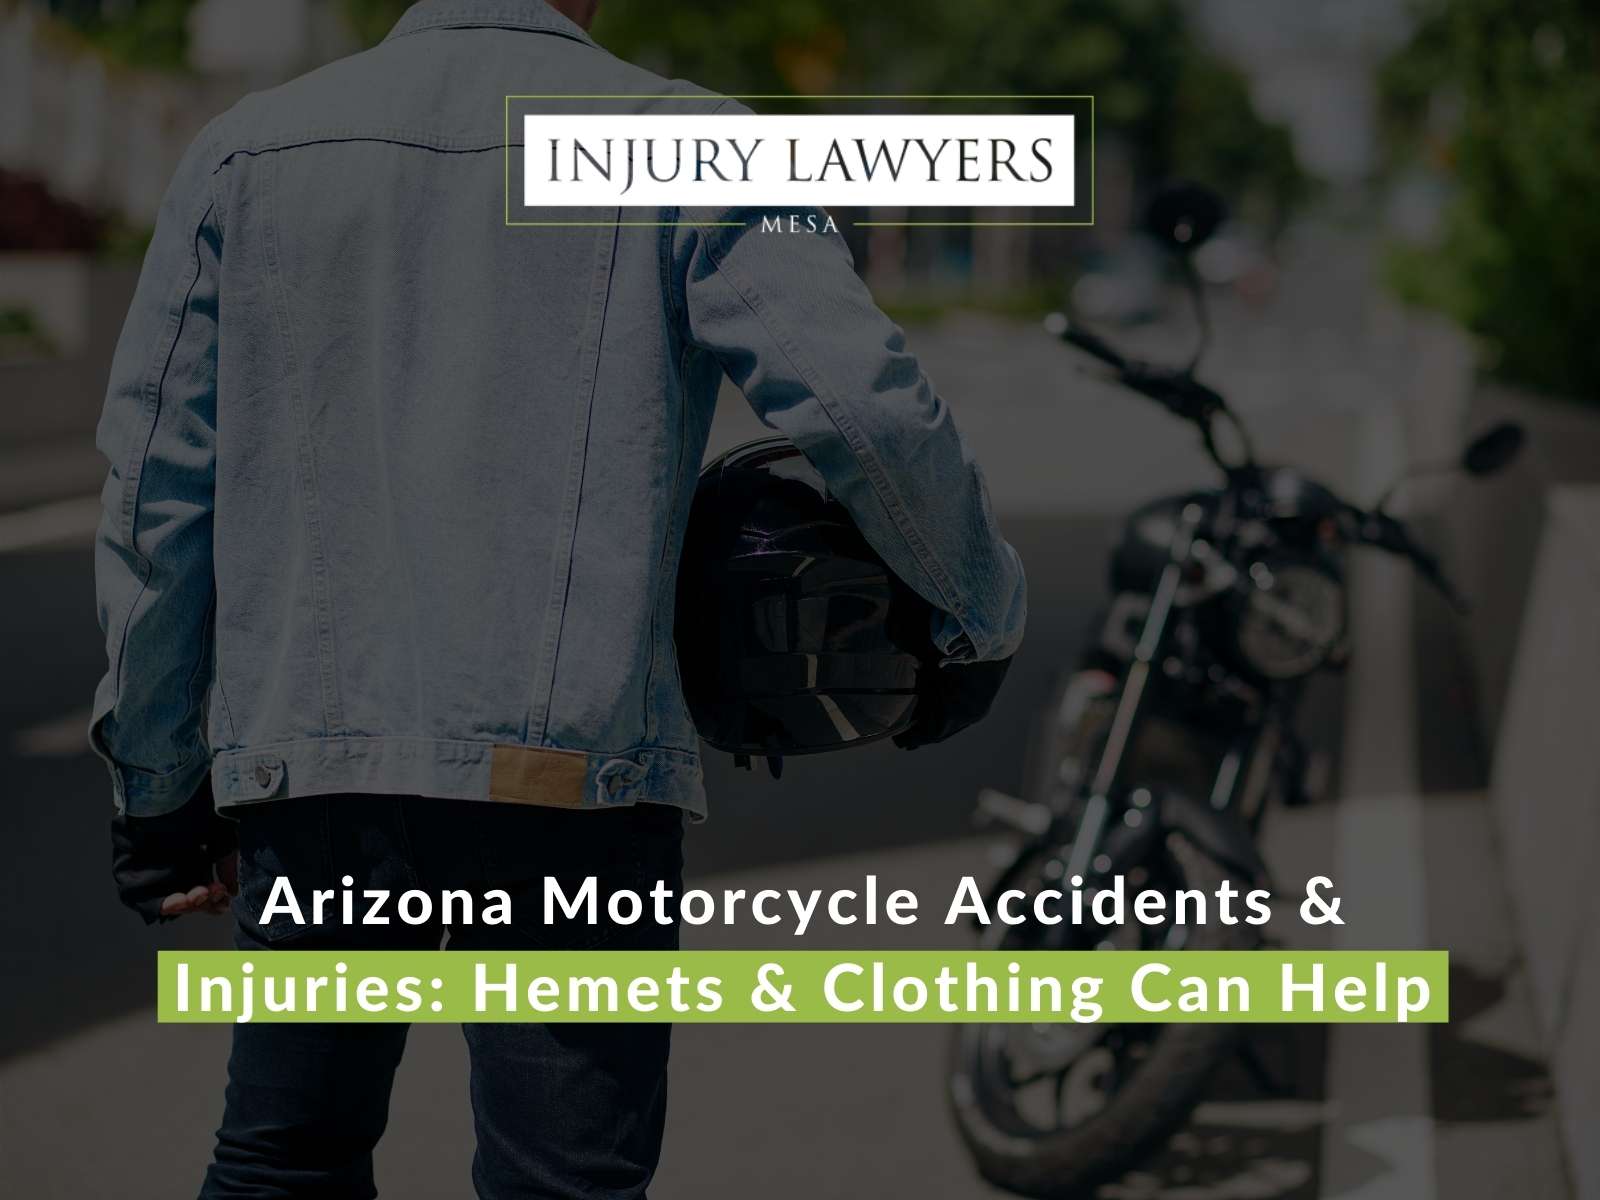 Arizona Motorcycle Accidents & Injuries: Hemets & Clothing Can Help